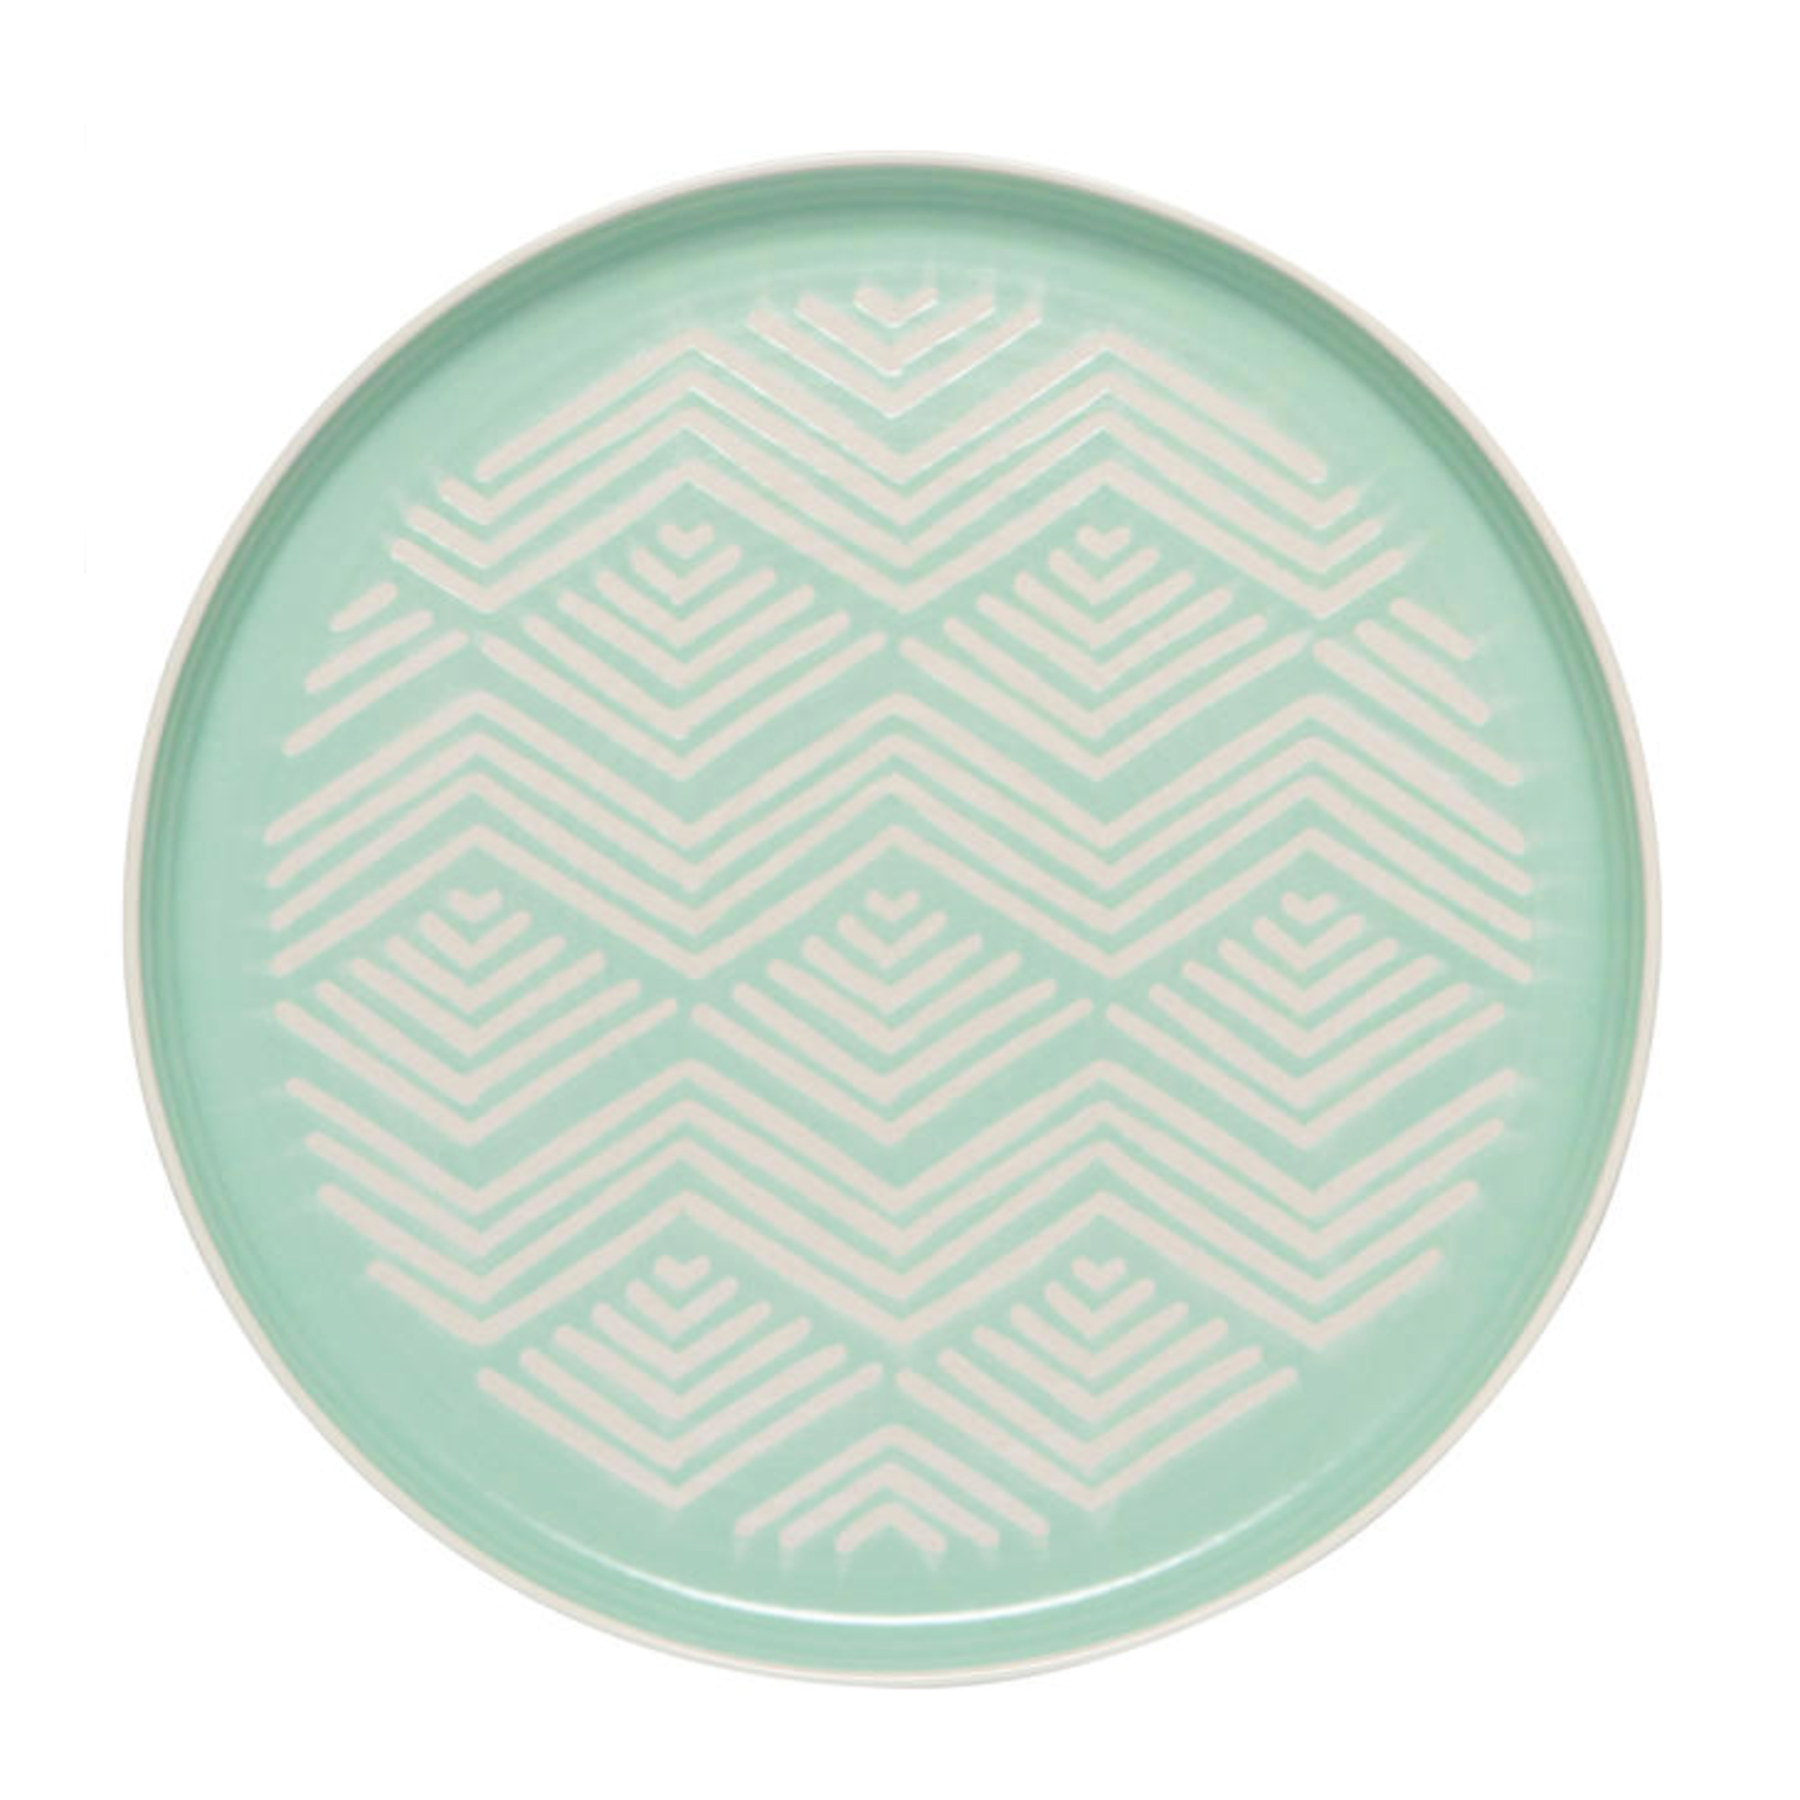 Imprint Collection - Dinner Plate